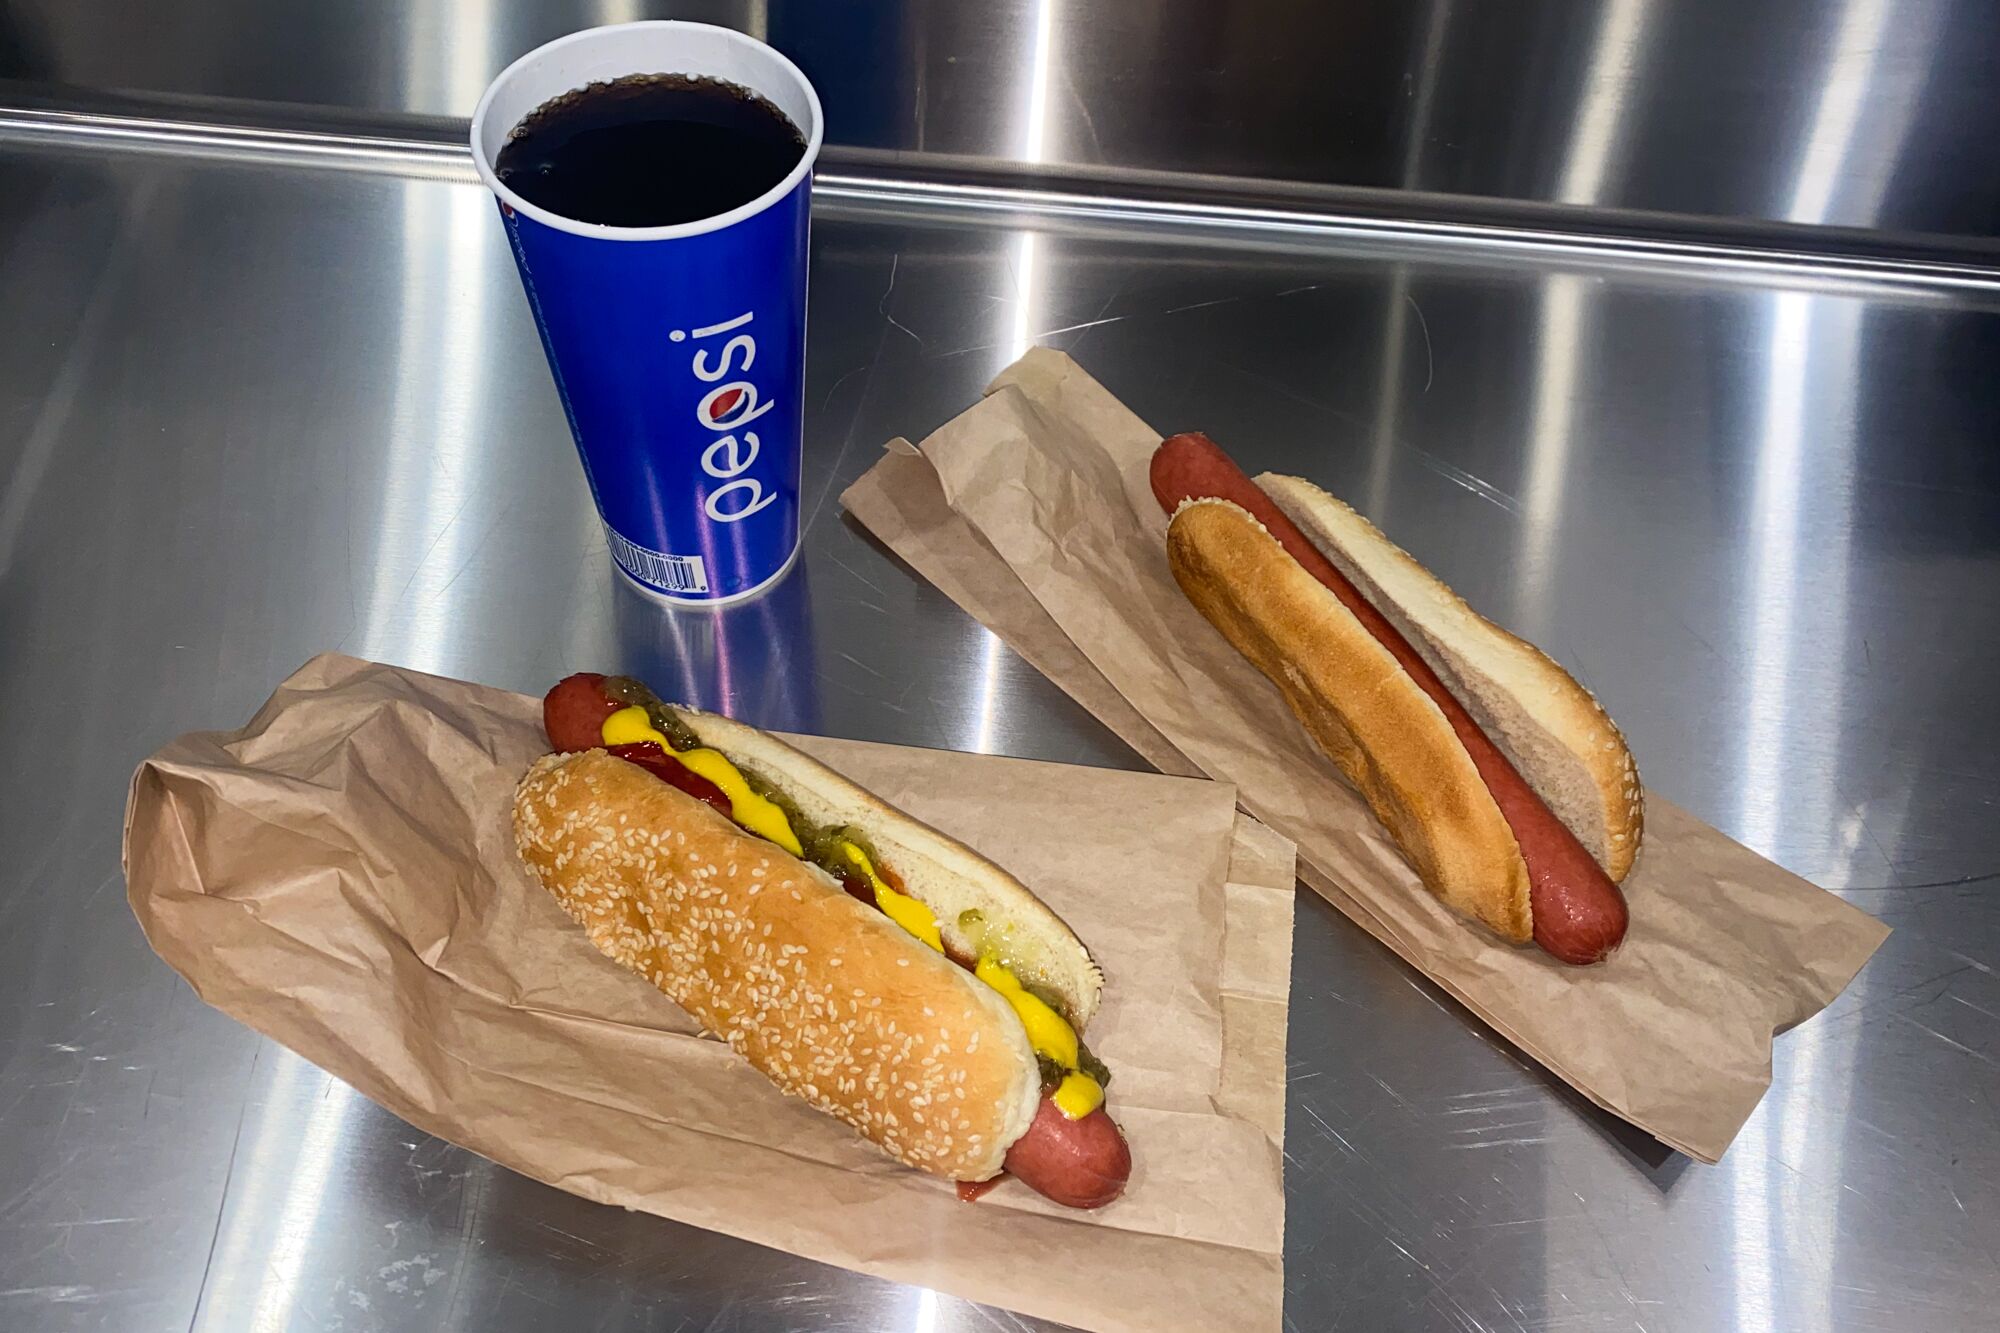 Costco vs Sam #39 s Club hot dog combo: Which is better? Los Angeles Times